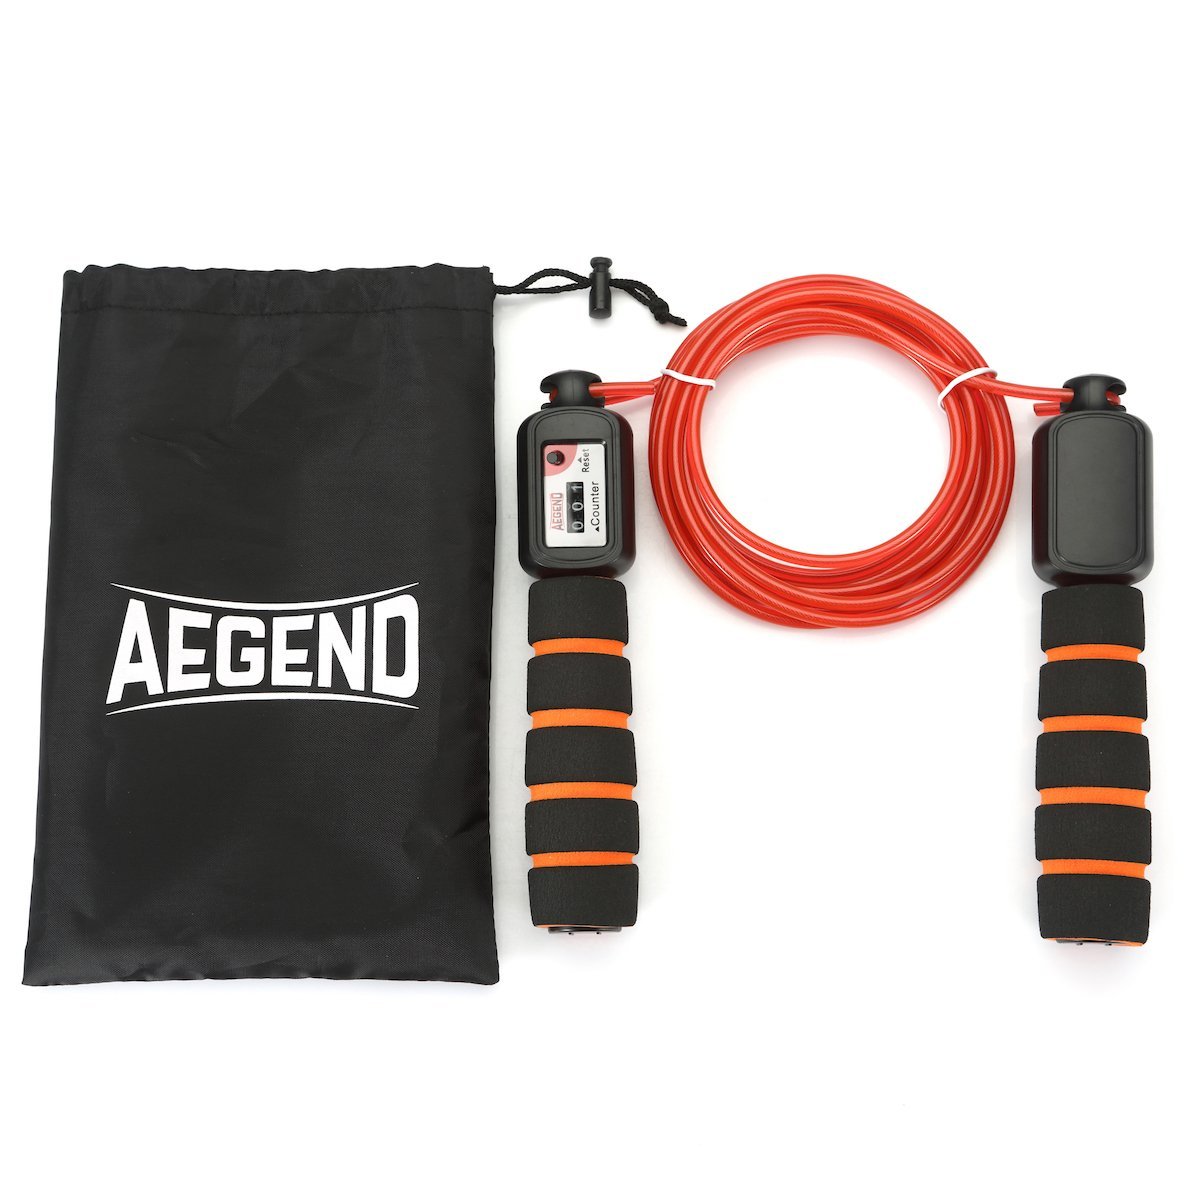 Adjustable Counting Speed Jump Rope – Just $6.99!